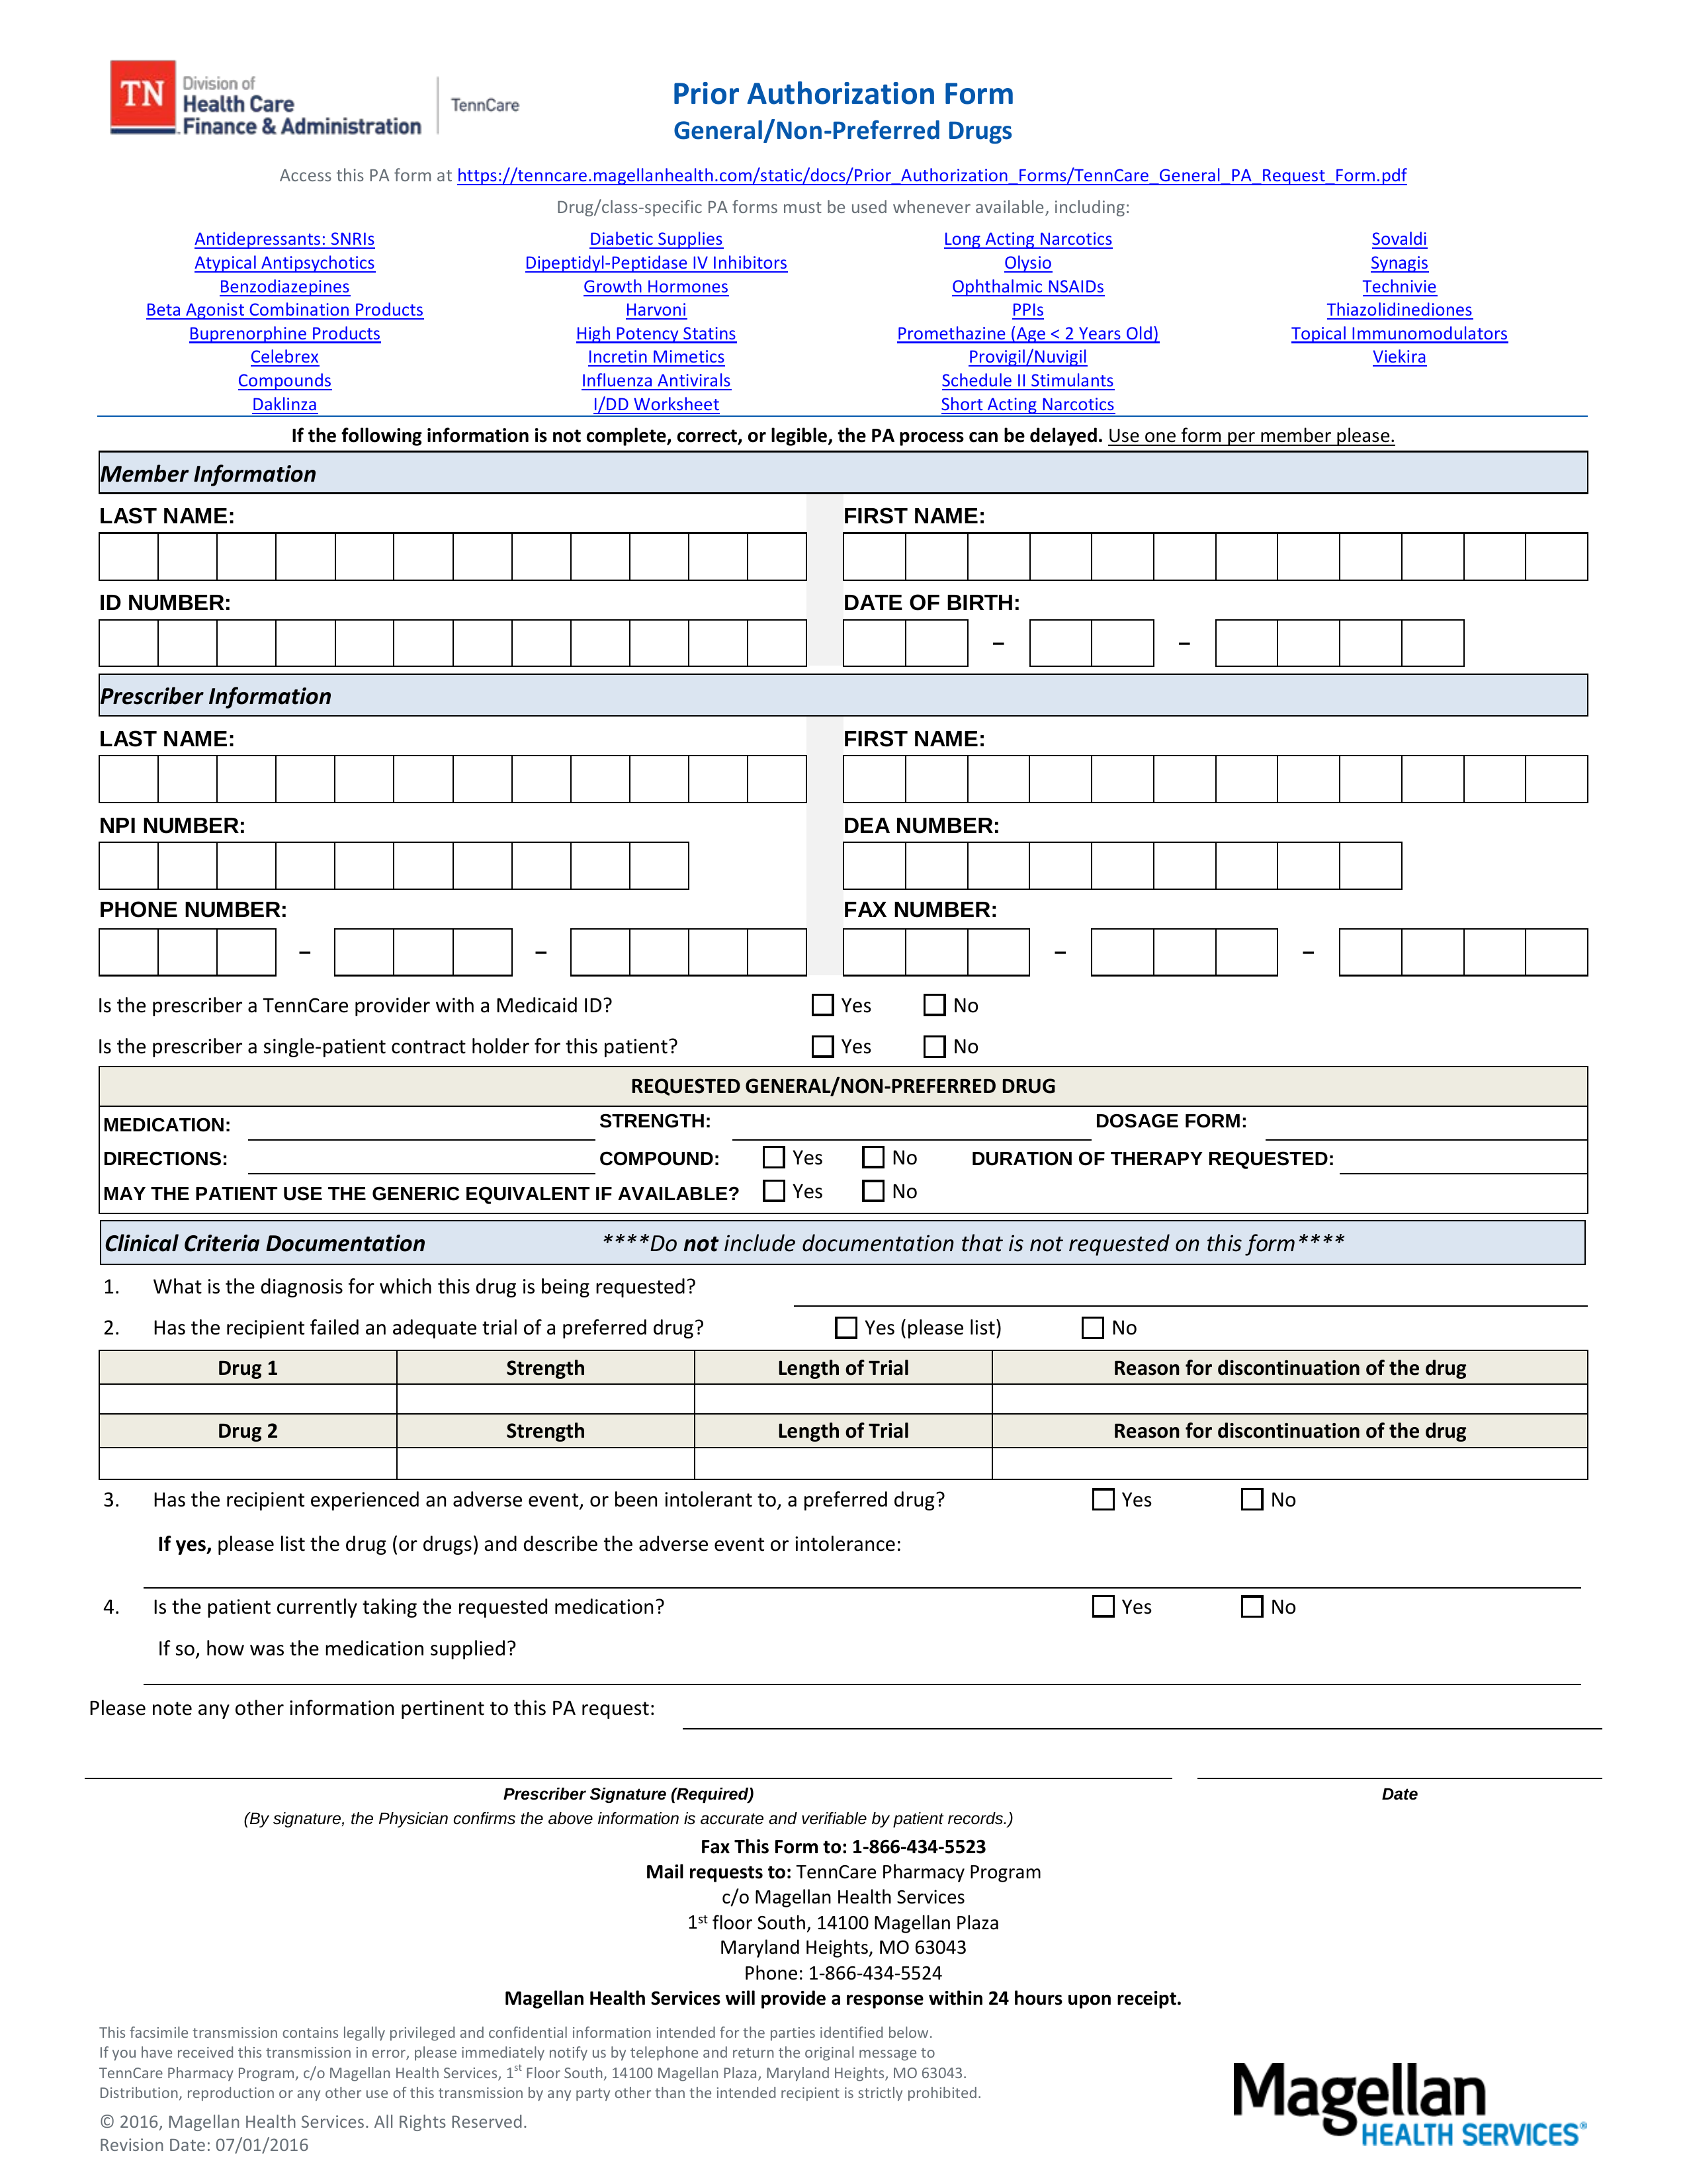 Tennessee Medicaid Prior Authorization Form